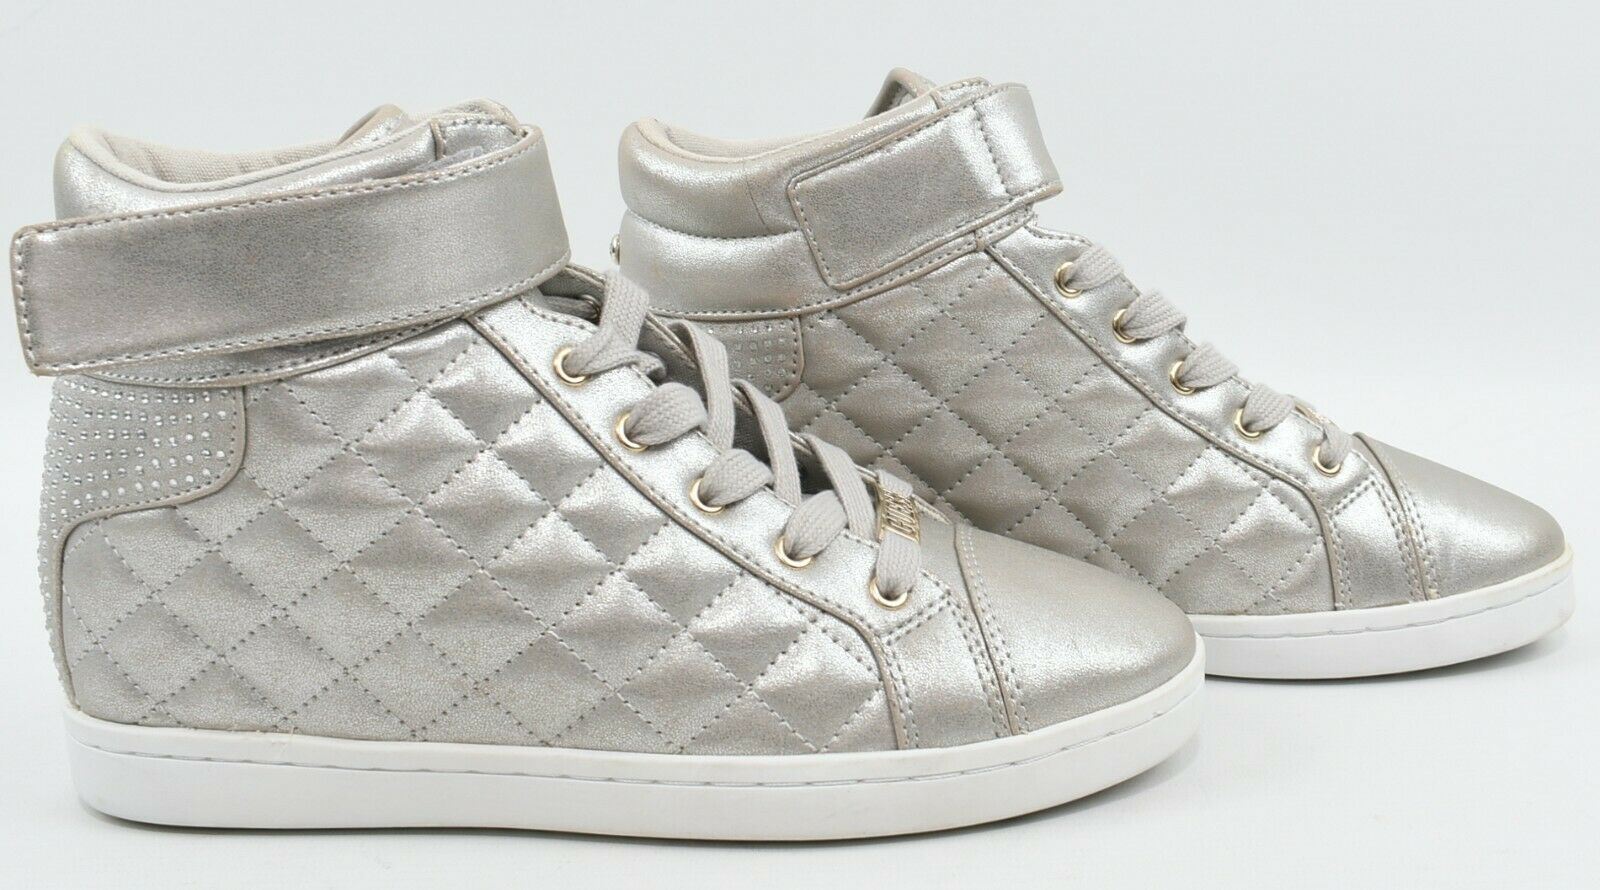 GUESS Women's Quilted High Top Trainers, Silver Grey, size UK 6 *EX DISPLAY*